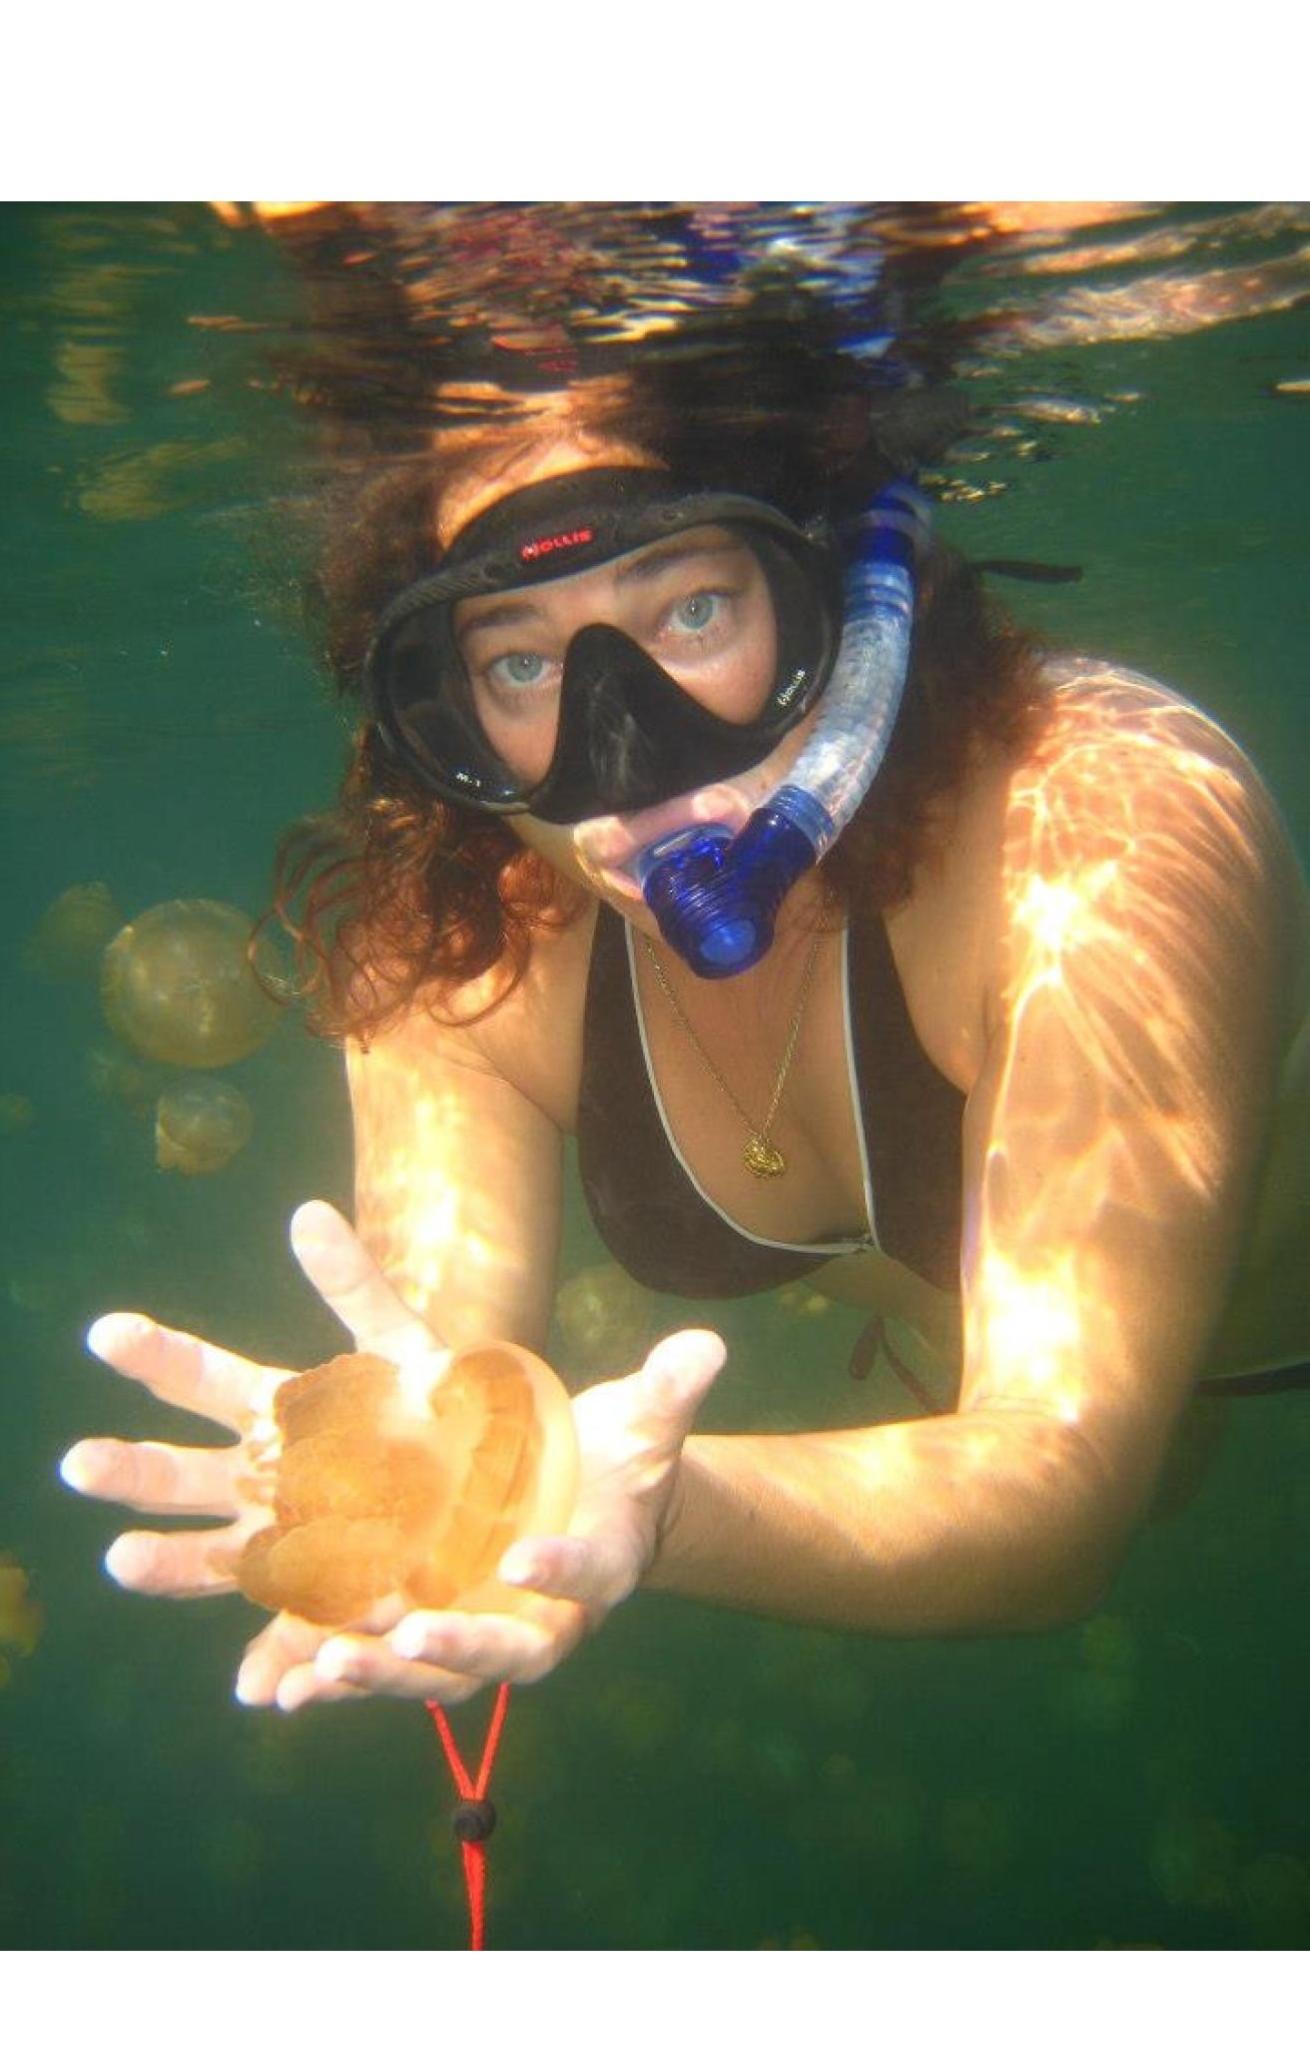 Autumn Blum cradles a golden jellyfish in Palau during the trip that inspired her to create Stream2Sea. 